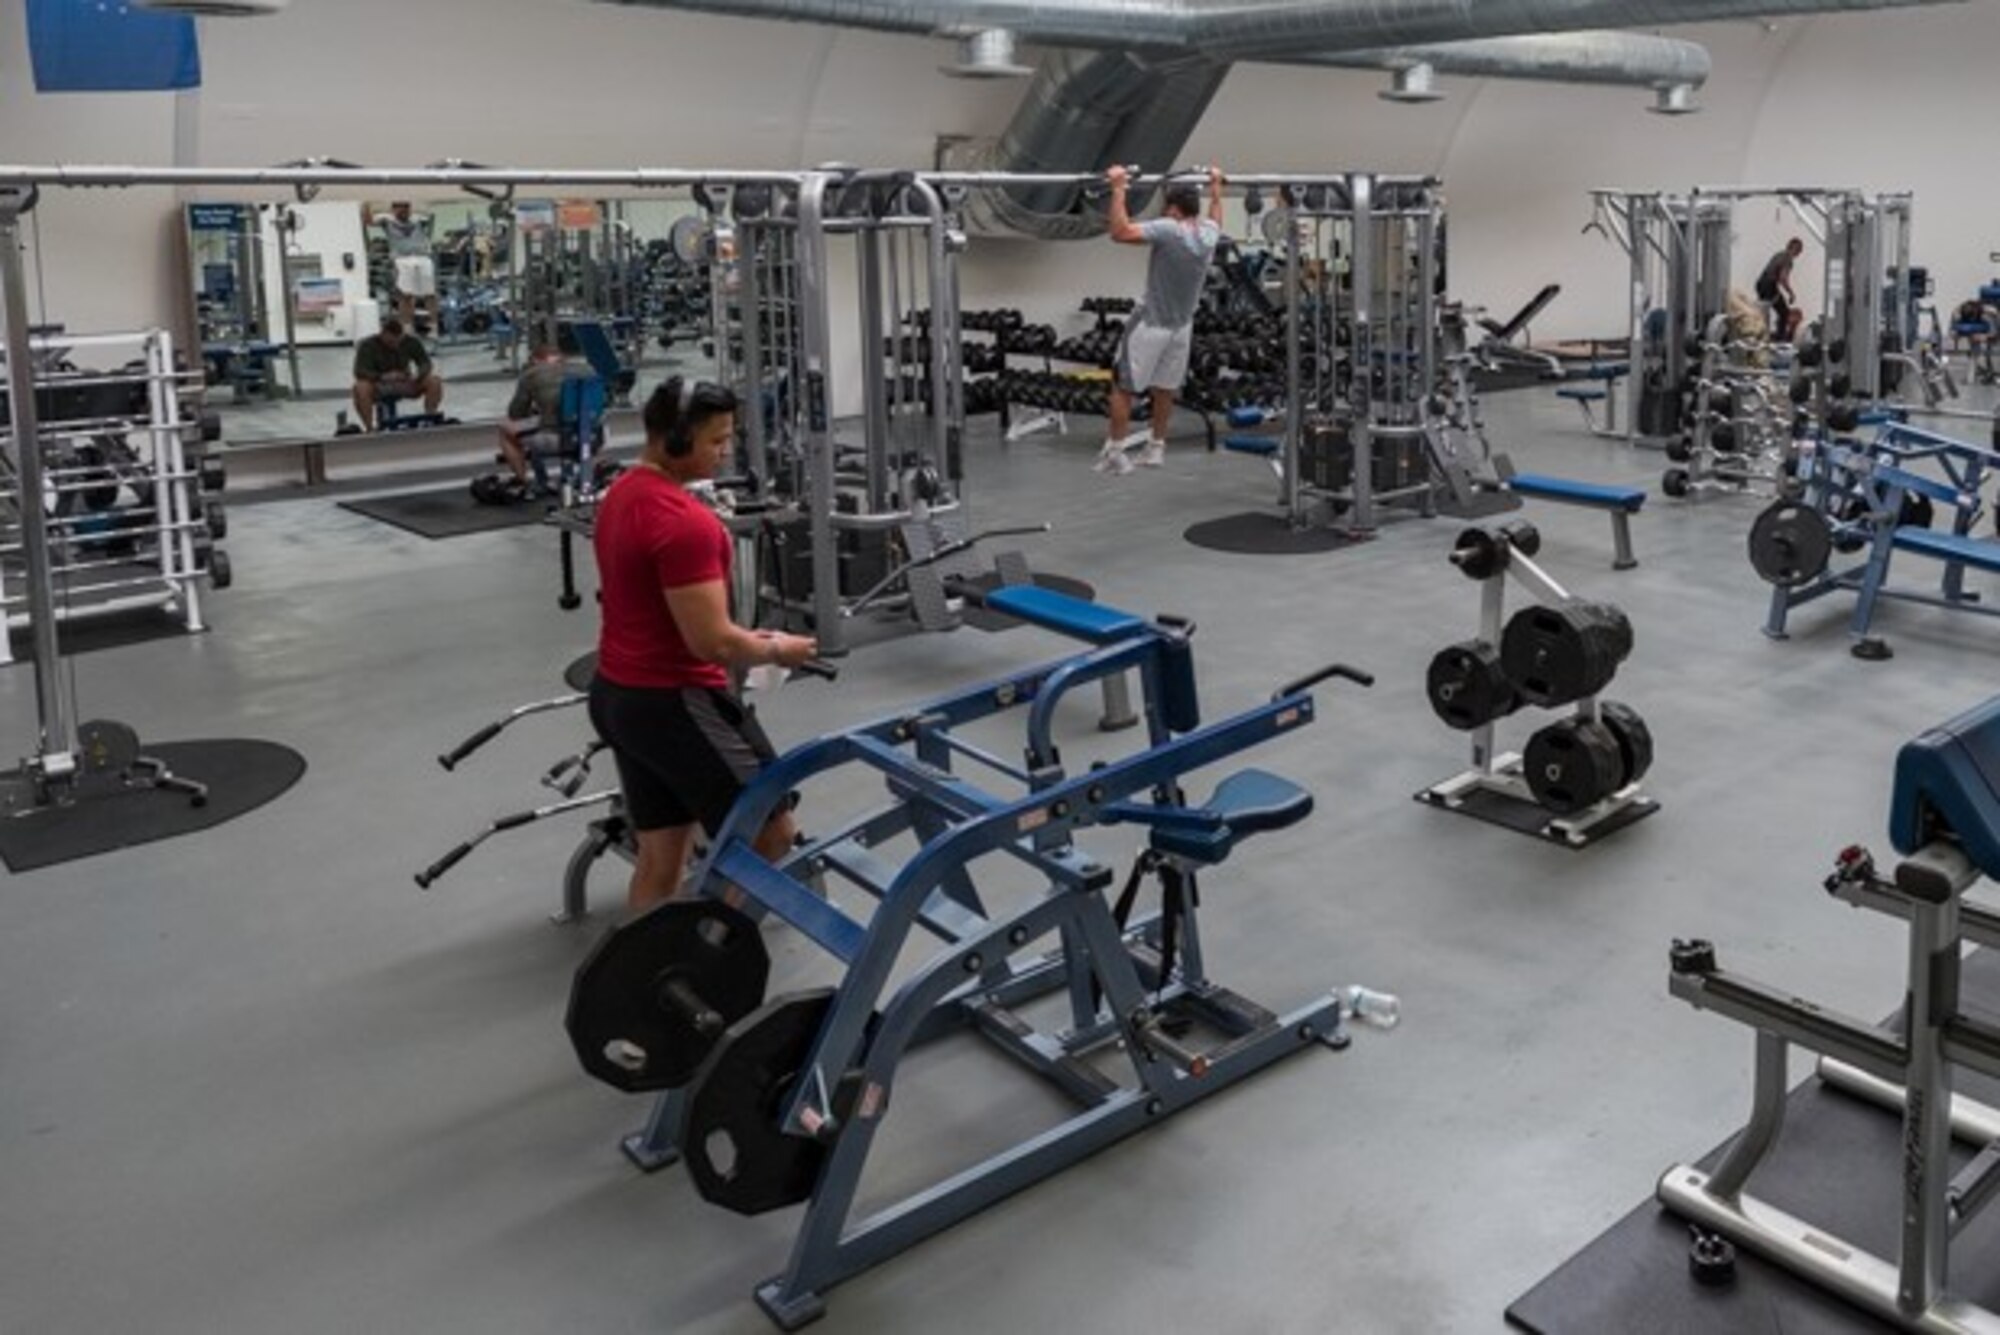 Airmen from Edwards Air Force Base, California, work out at the base gymnasium, maintaining appropriate physical distance, April 7.